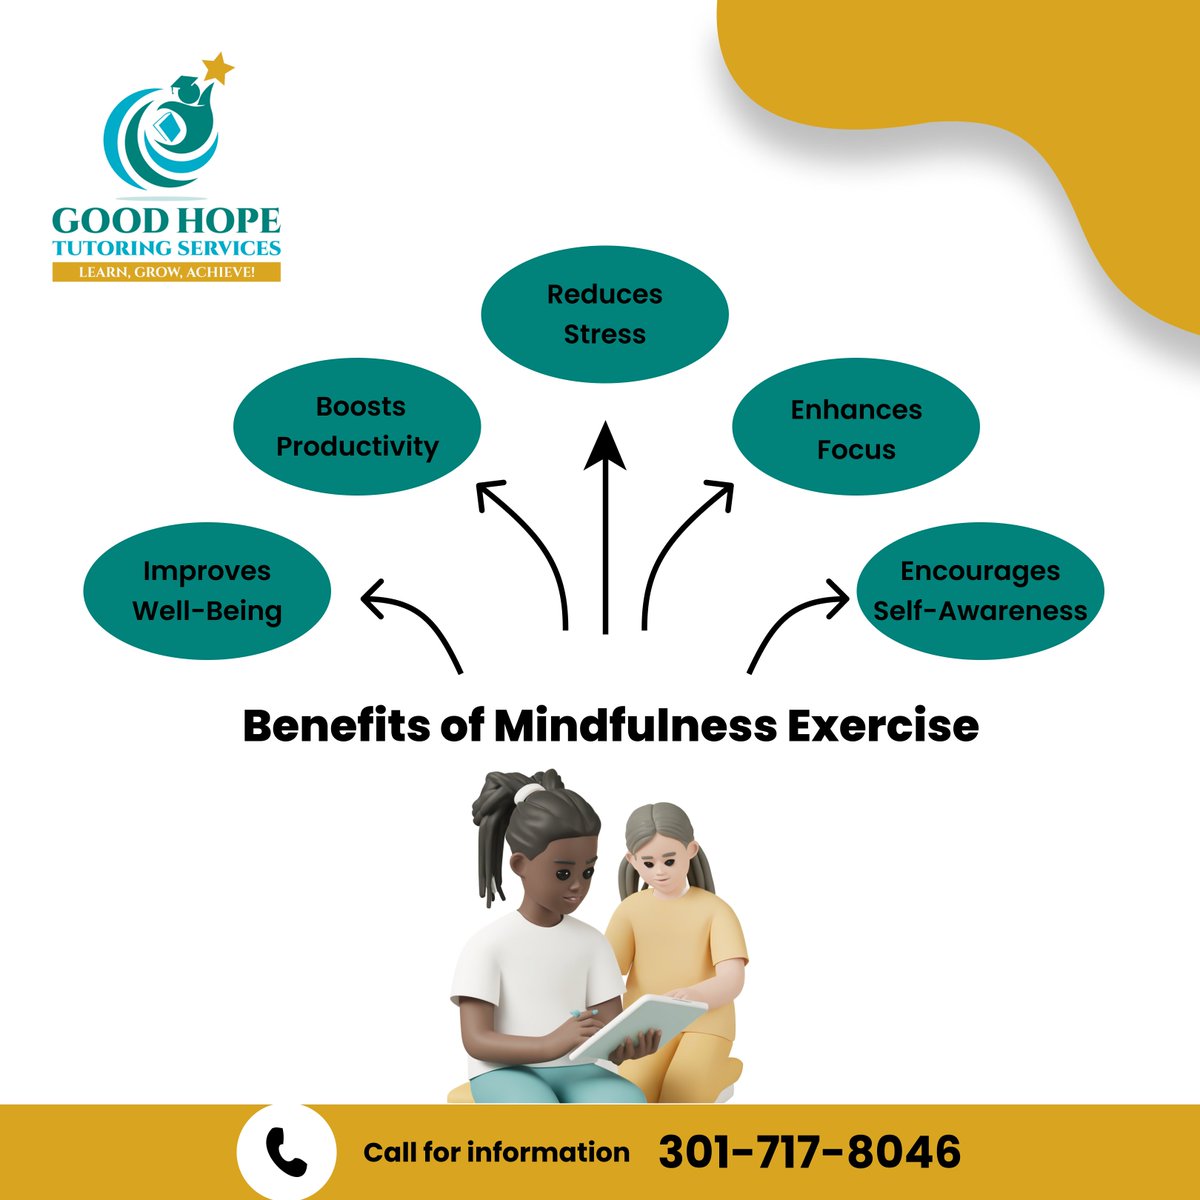 🌟 Benefits of Mindfulness Exercise 🌟
Reduces Stress 🧘‍♀️
Boosts Productivity 📈
Enhances Focus 🎯
Improves Well-Being 🌿
Encourages Self-Awareness 🤔
#Mindfulness #WellBeing #StressRelief #Productivity #Focus #SelfAwareness #MentalHealth #HealthyLiving #MindfulLiving